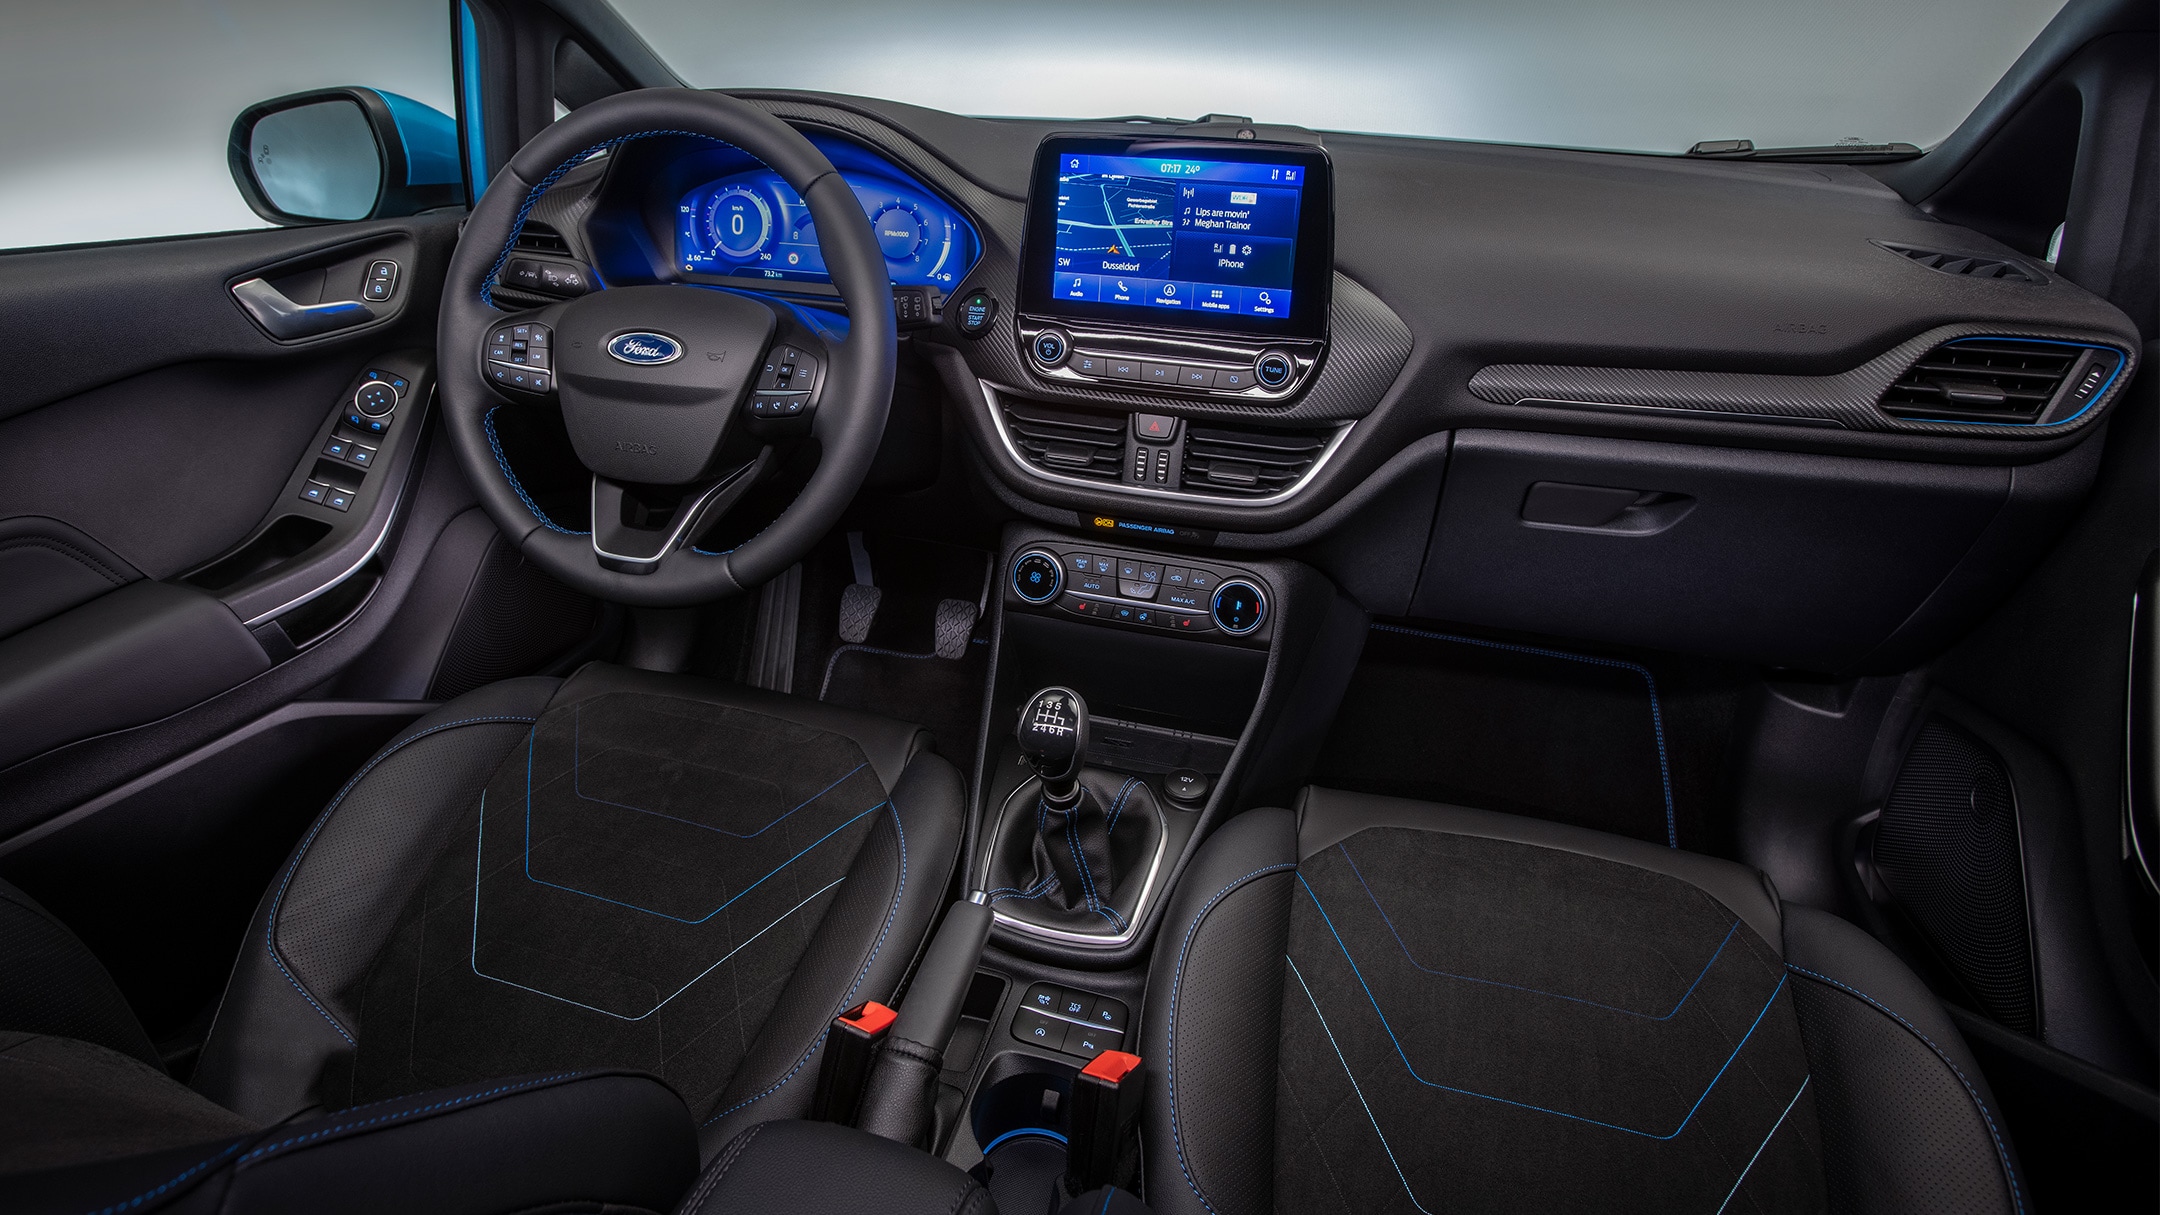 All-New Ford Fiesta interior view of dashboard